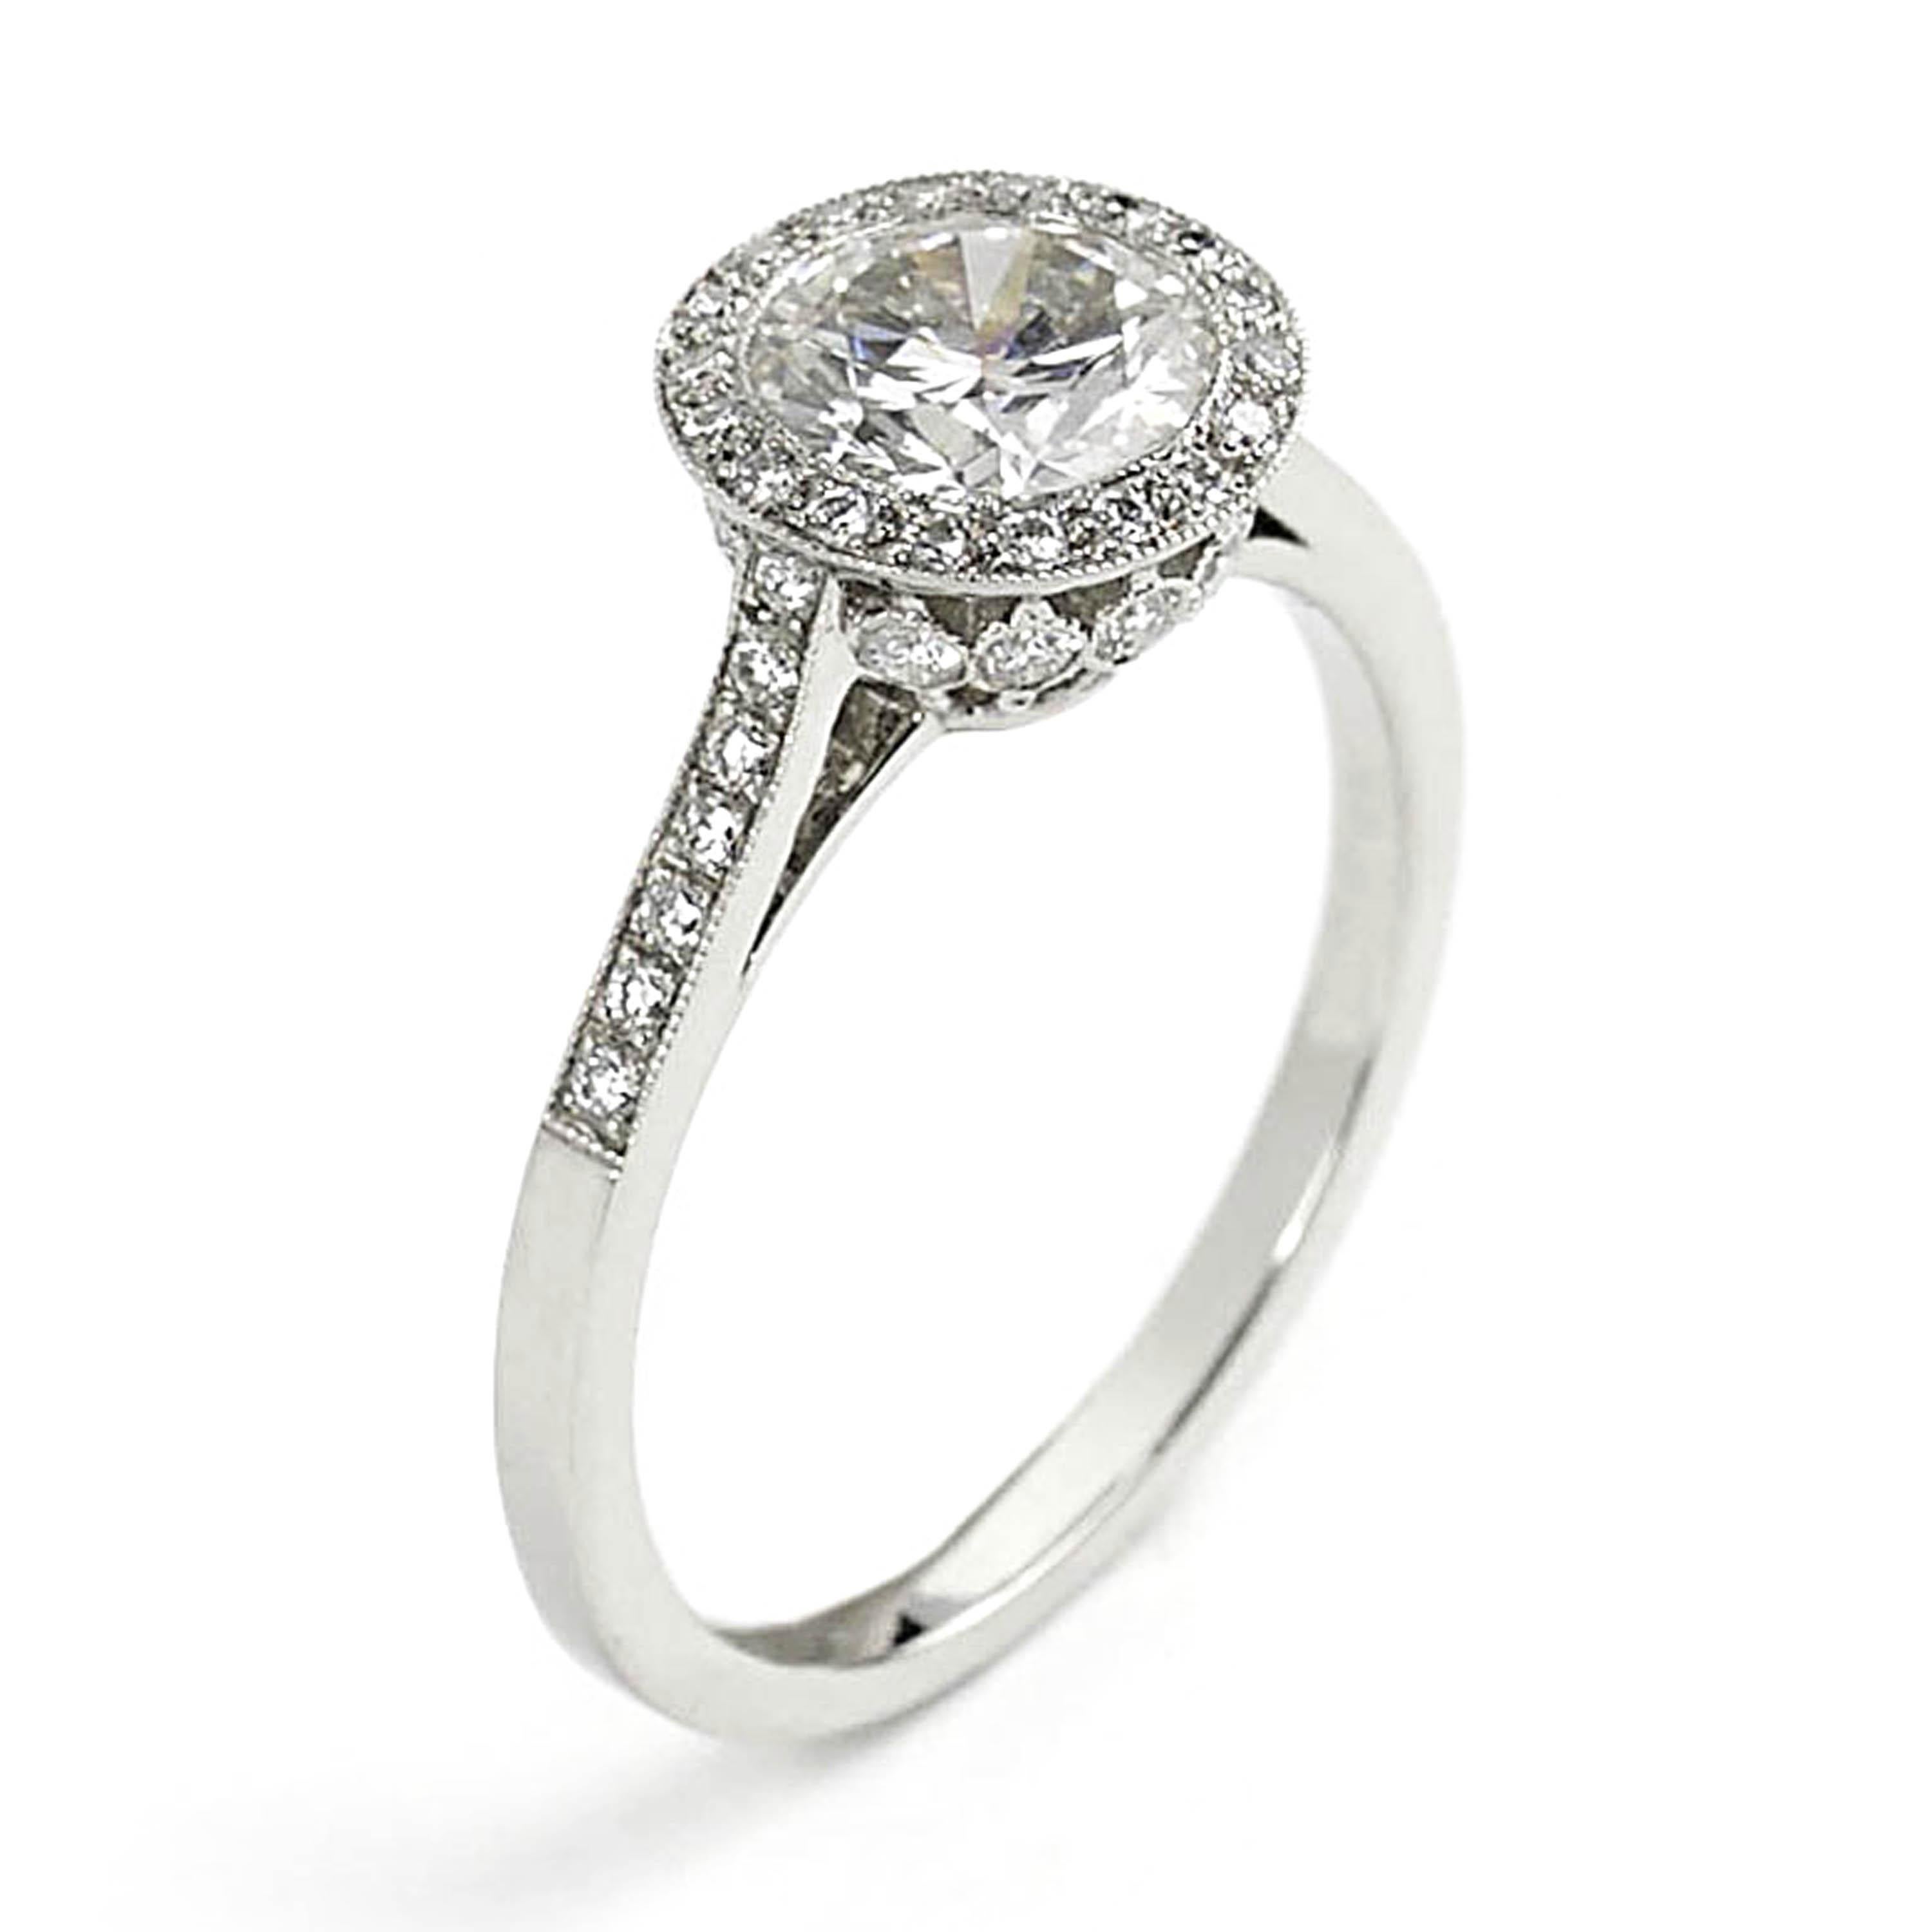 A modern solitaire diamond halo design ring, set with an approximately 1.00 carat, H/I colour, VS2/SI1 clarity, round brilliant-cut diamond, with surrounding micro pavé set round brilliant-cut diamonds, forming a halo around the solitaire diamond.